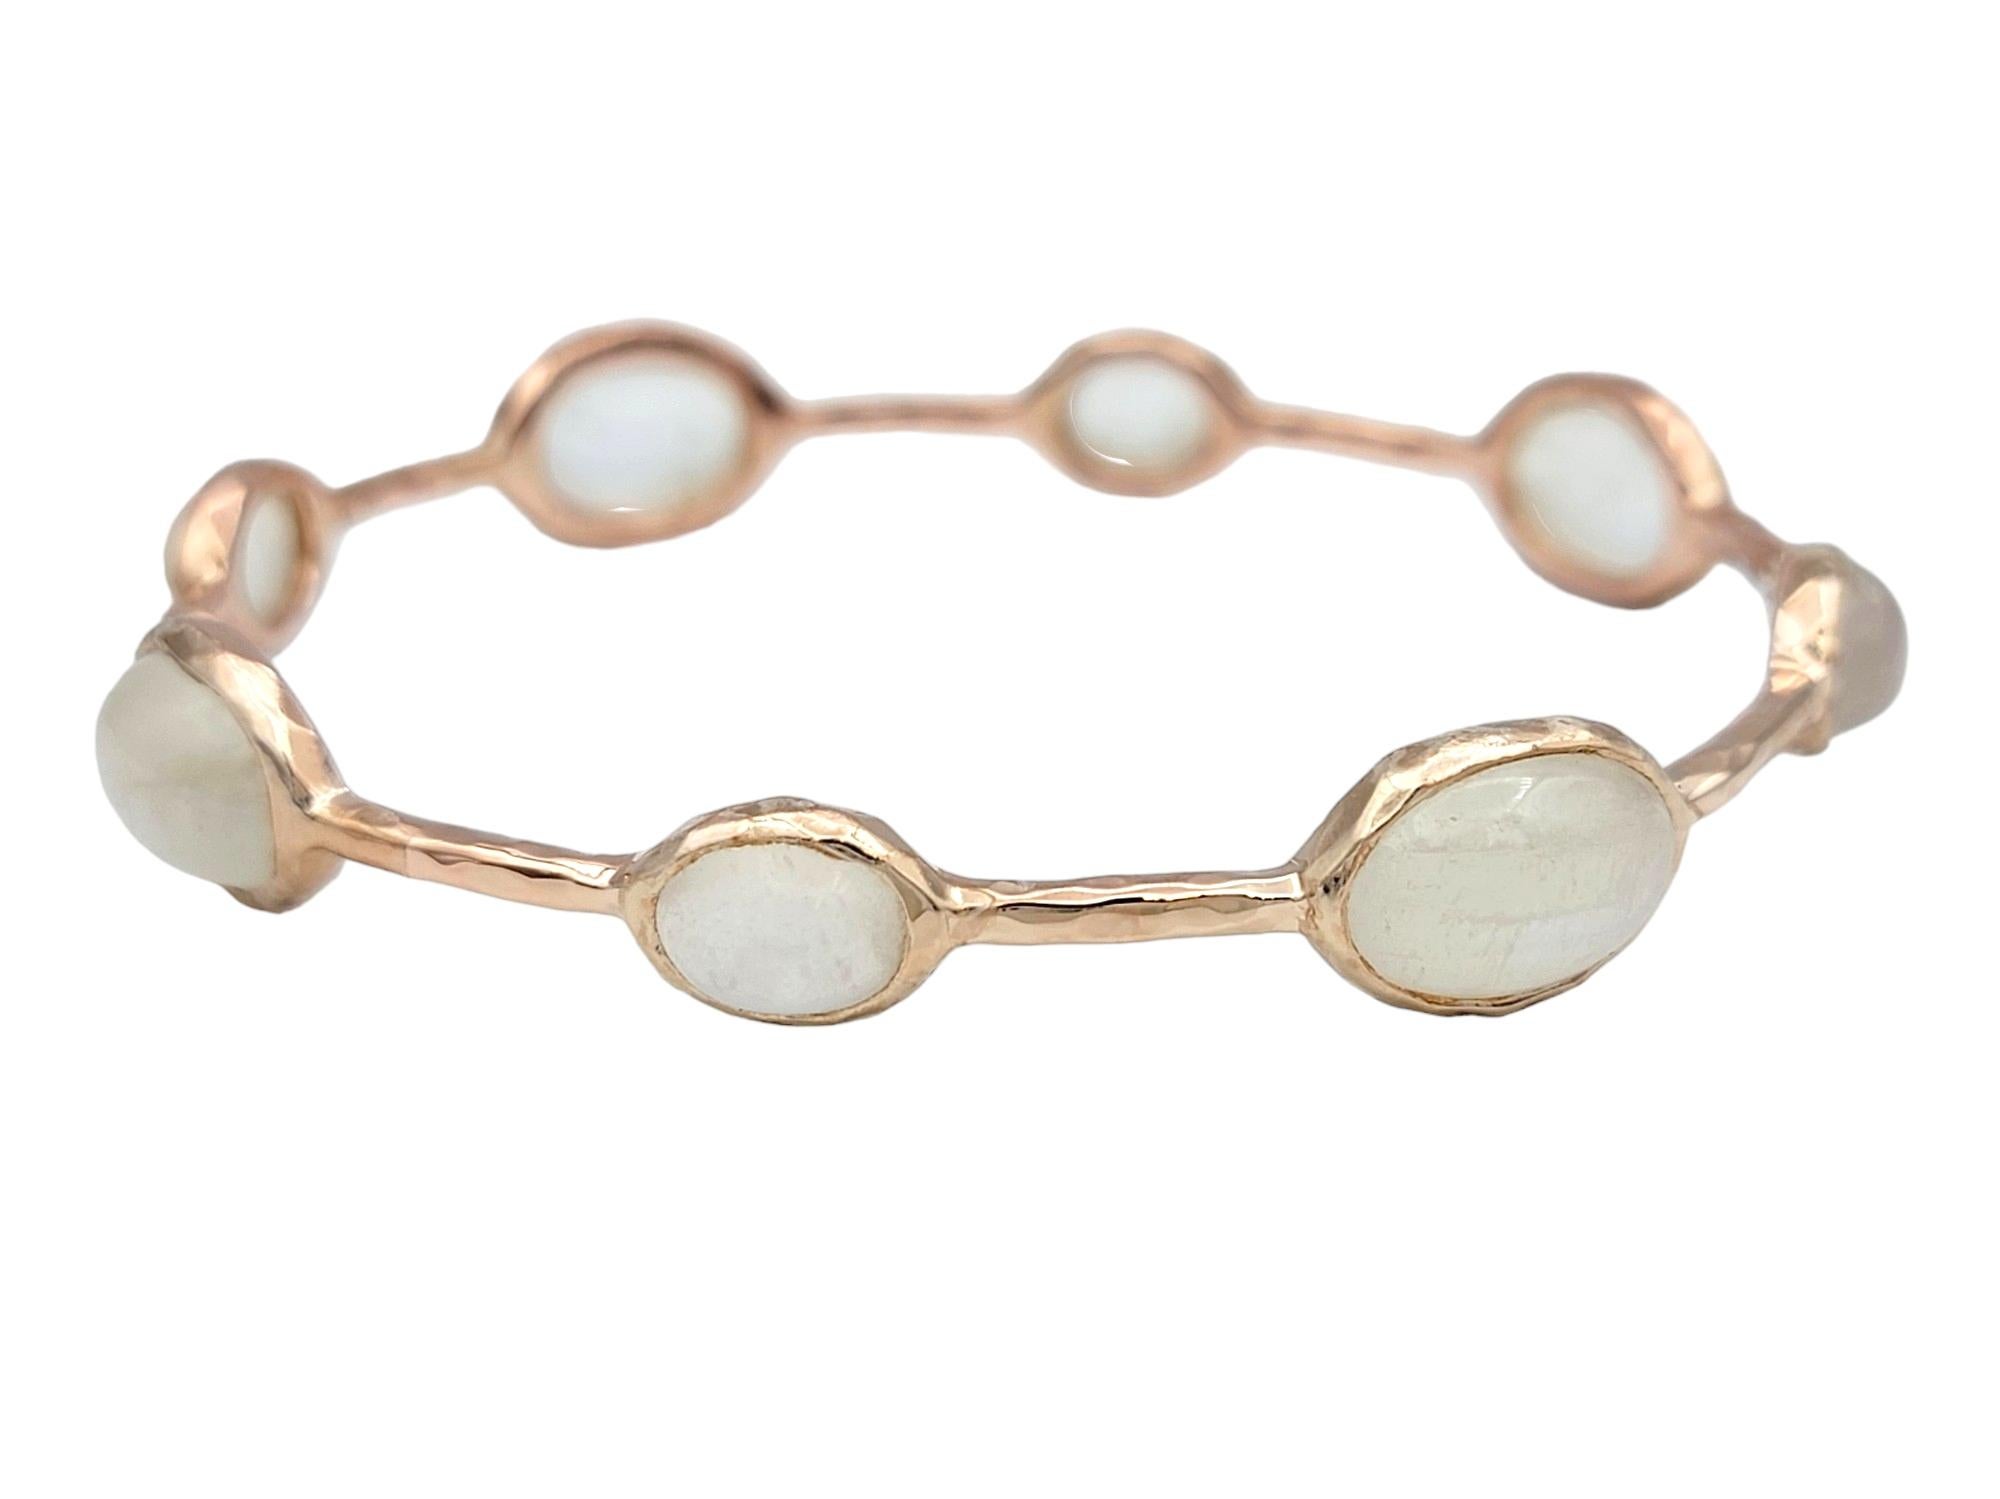 Exuding ethereal beauty and understated elegance, this Ippolita bangle bracelet is a captivating addition to any jewelry collection. Crafted in pink-toned sterling silver, the bracelet boasts a delicate hue that adds a subtle touch of femininity to